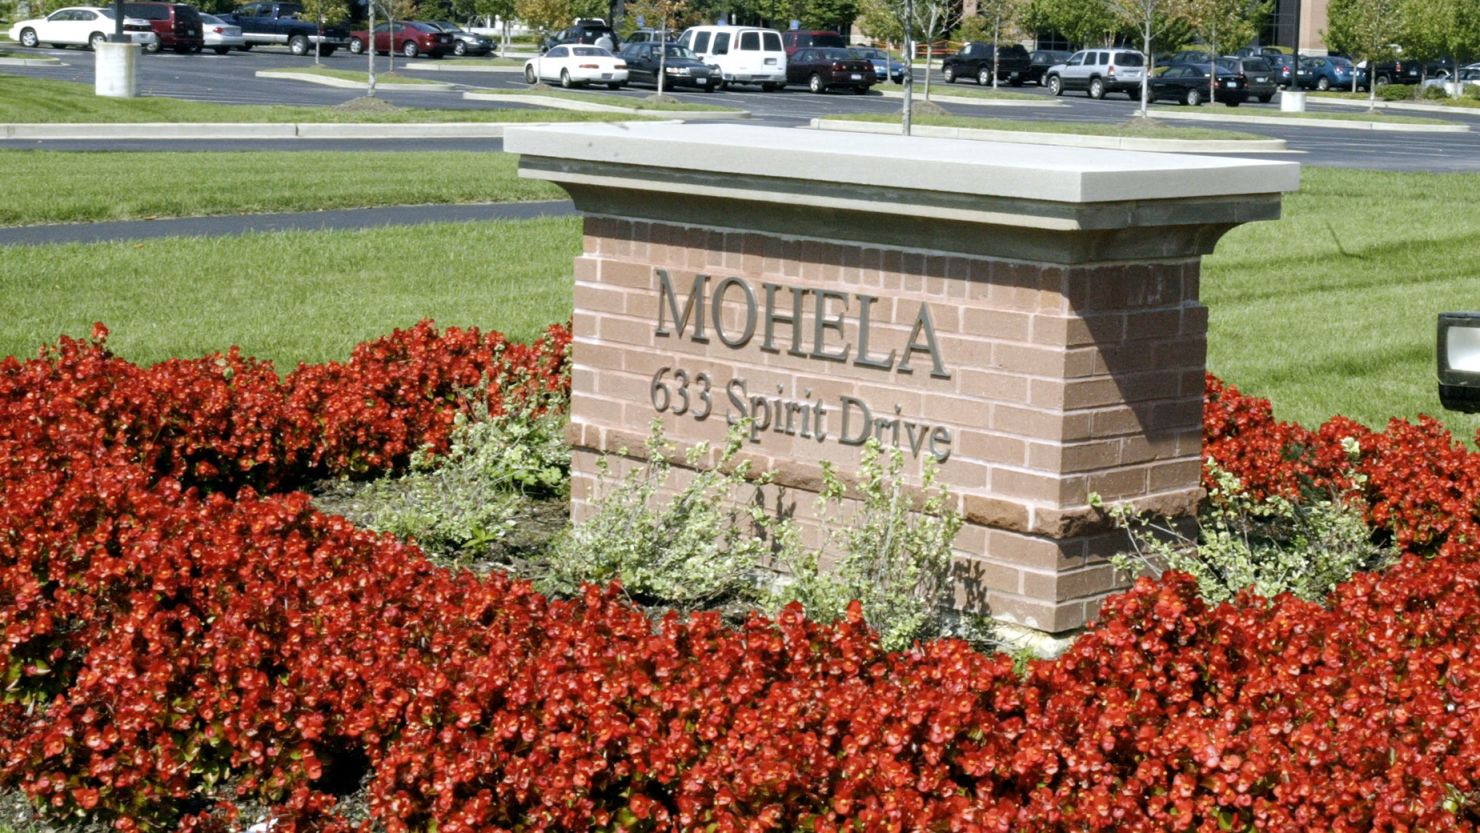 Unveiled How Student Loan Hold Times Affect Millions, Mohela Under Fire--